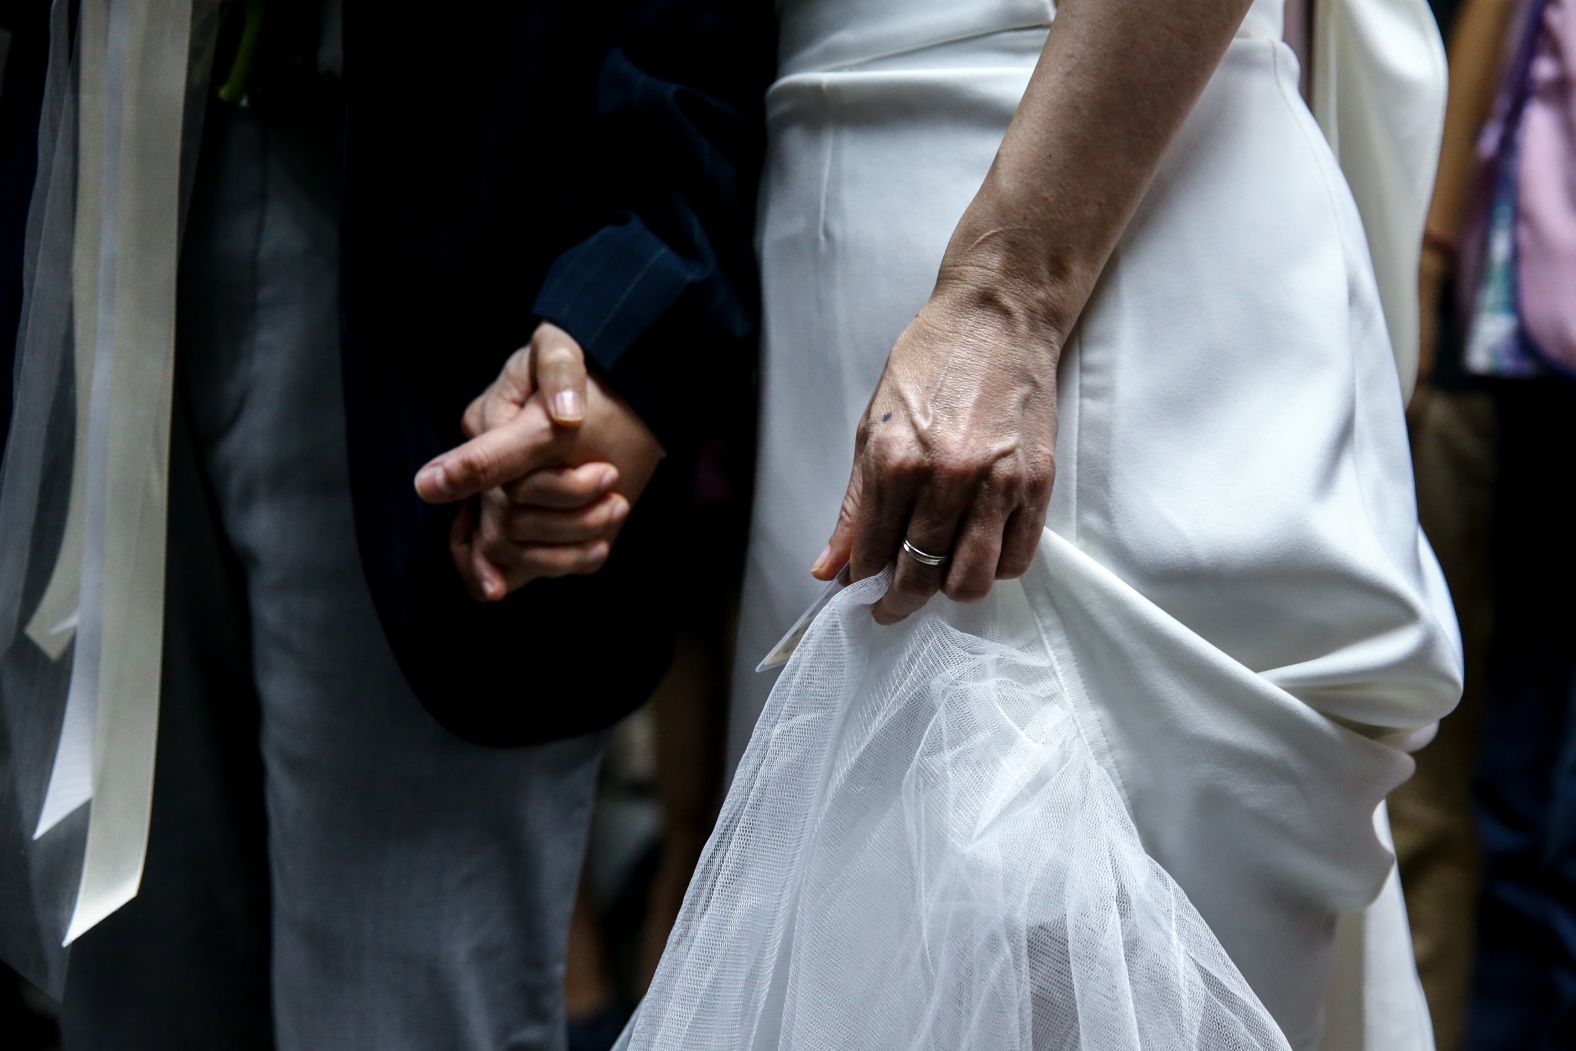 Couples hold hands in Taipei nearly a week after Taiwan's legislature passed a bill legalizing same-sex marriage.